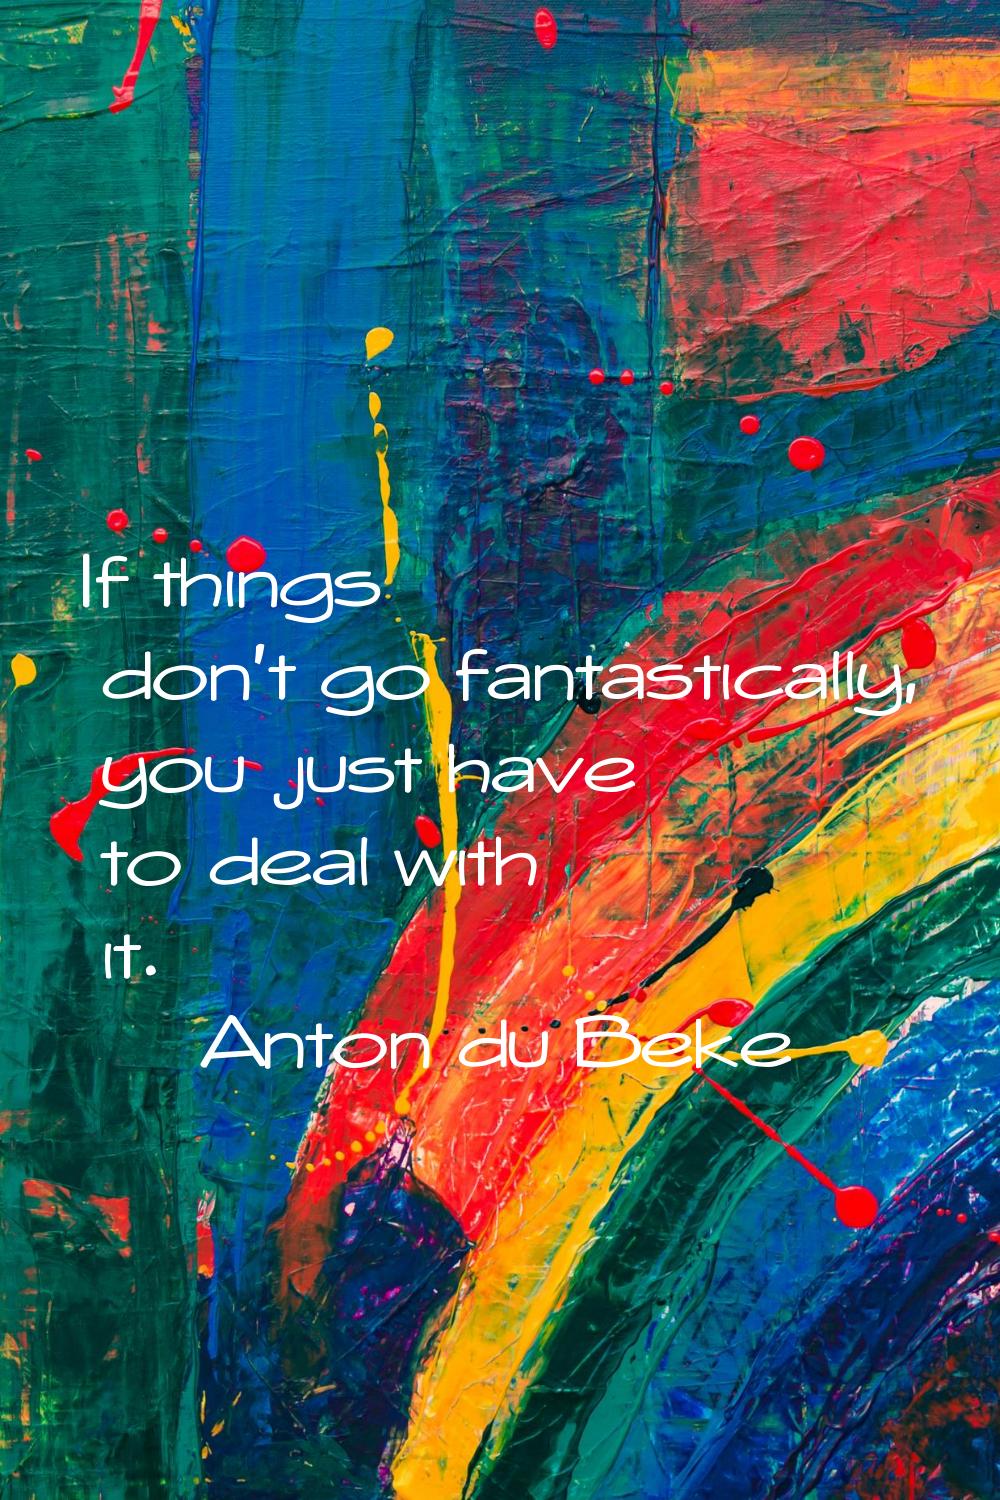 If things don't go fantastically, you just have to deal with it.